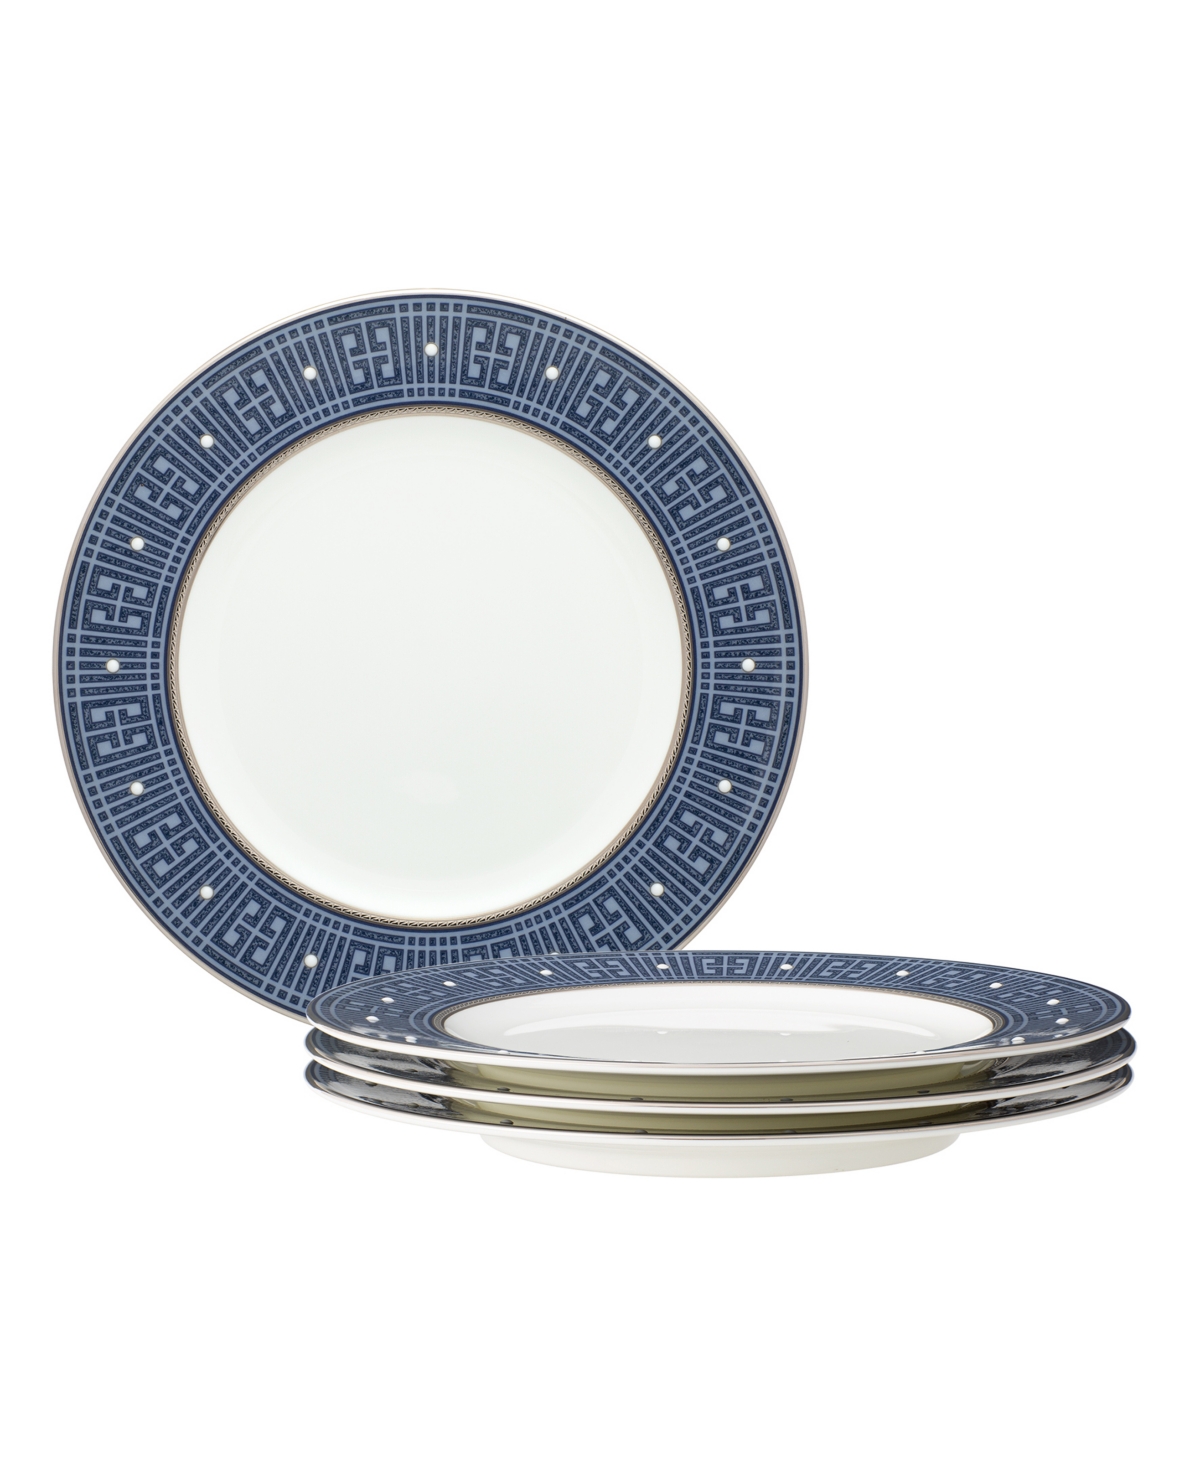 Noritake Infinity 4 Piece Salad Plate Set, Service For 4 In Blue